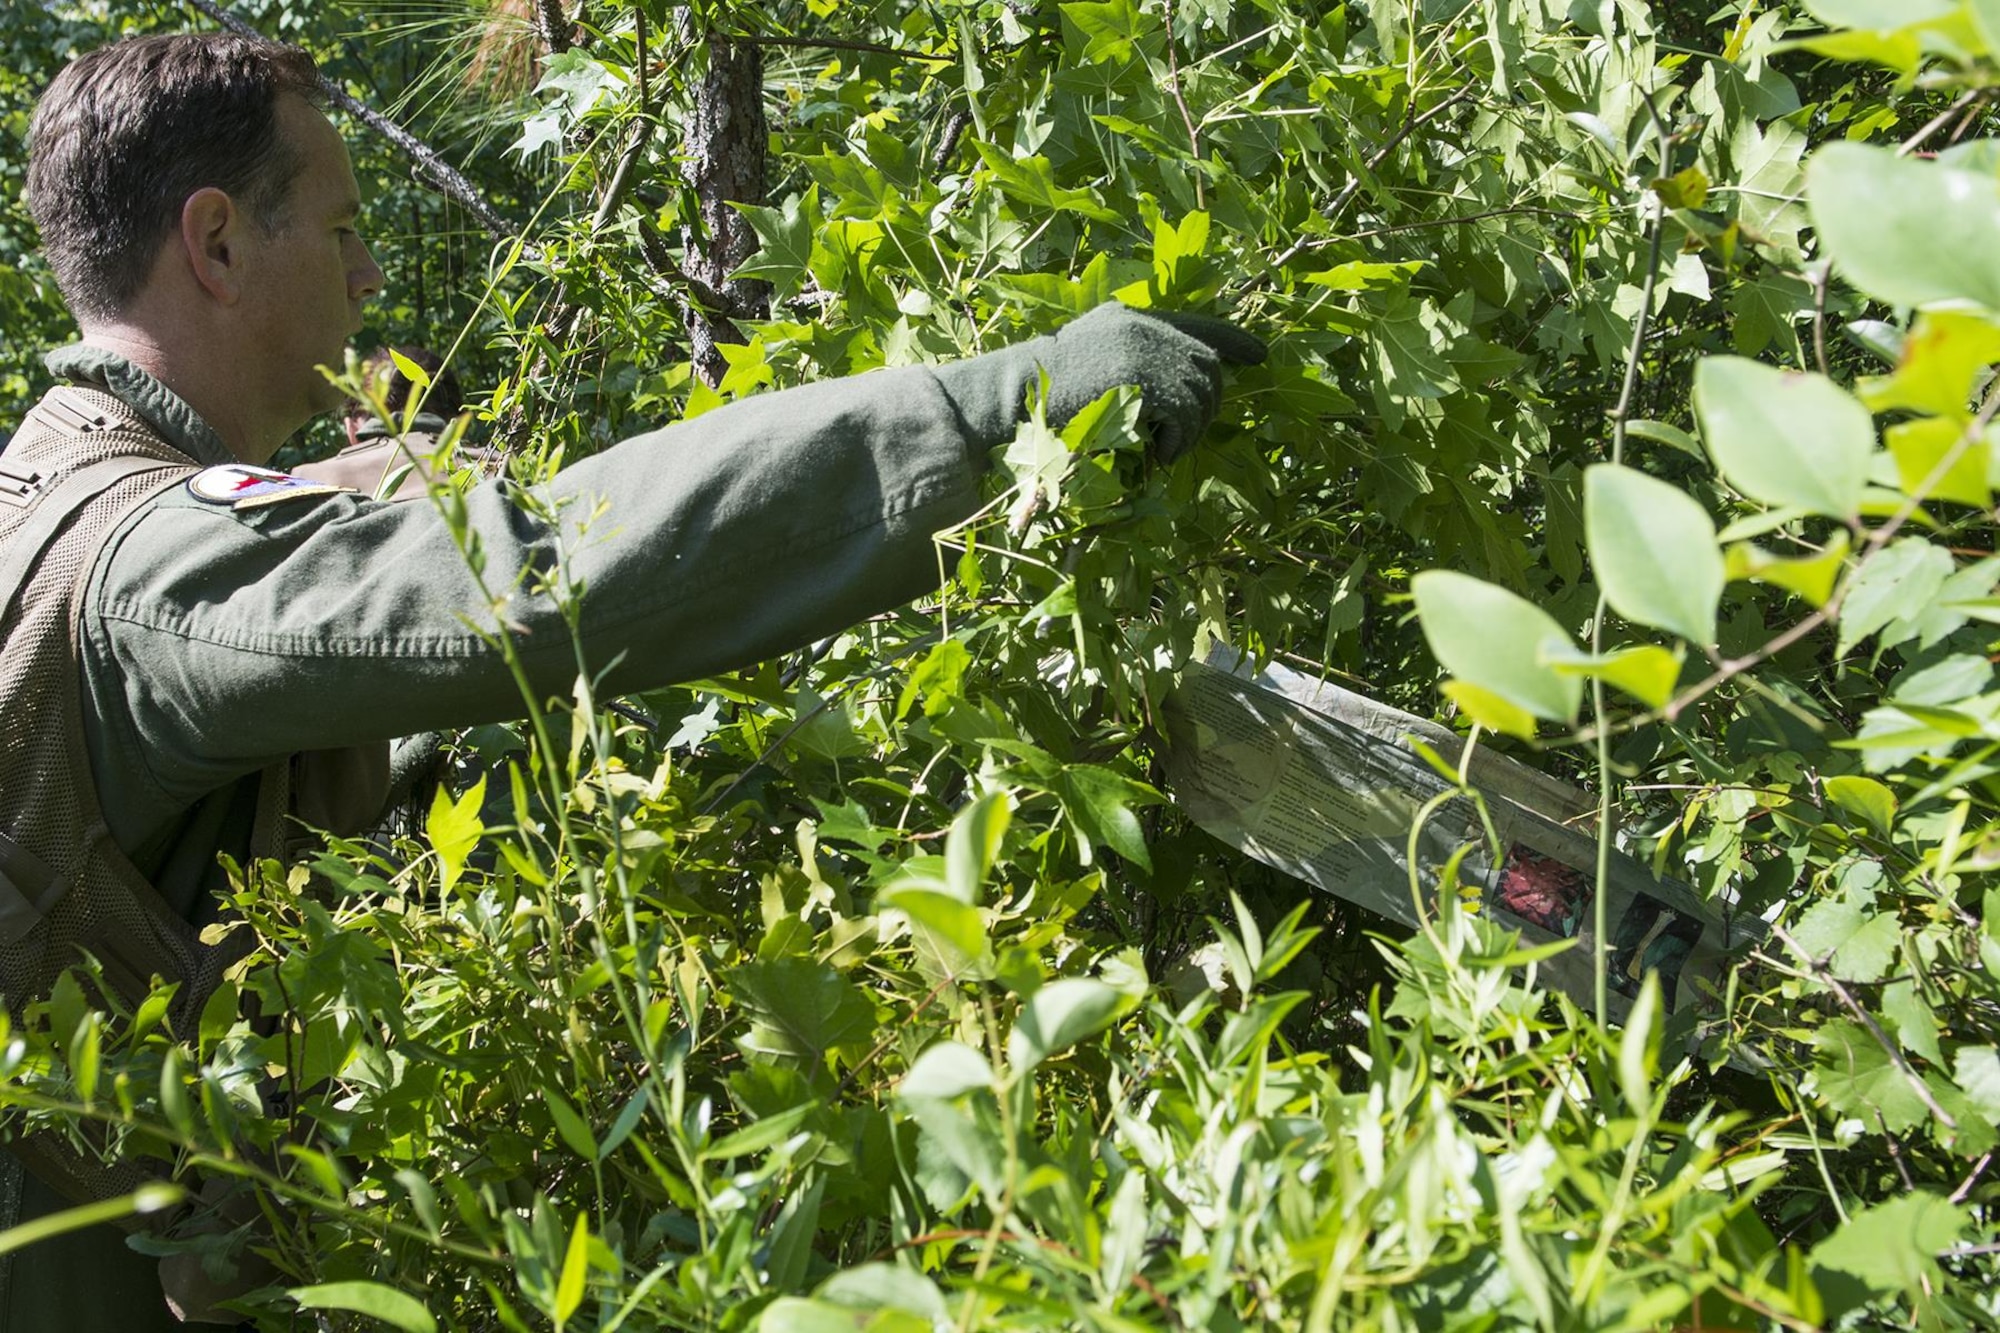 U.S. Air Force Lt. Col. Christopher Anderson, 307th Operations Support Squadron commander, camouflages his temporary shelter with foliage during SERE training on May 14, 2016, Claiborne Gunnery and Bombing Range, La. SERE, which stands for Survival, Evasion, Resistance and Escape, is required training for all aircrew members and provides the knowledge and tools necessary to survive on their own in any environment and under any condition should they have to abandon their aircraft. (U.S. Air Force photo by Master Sgt. Greg Steele/Released)